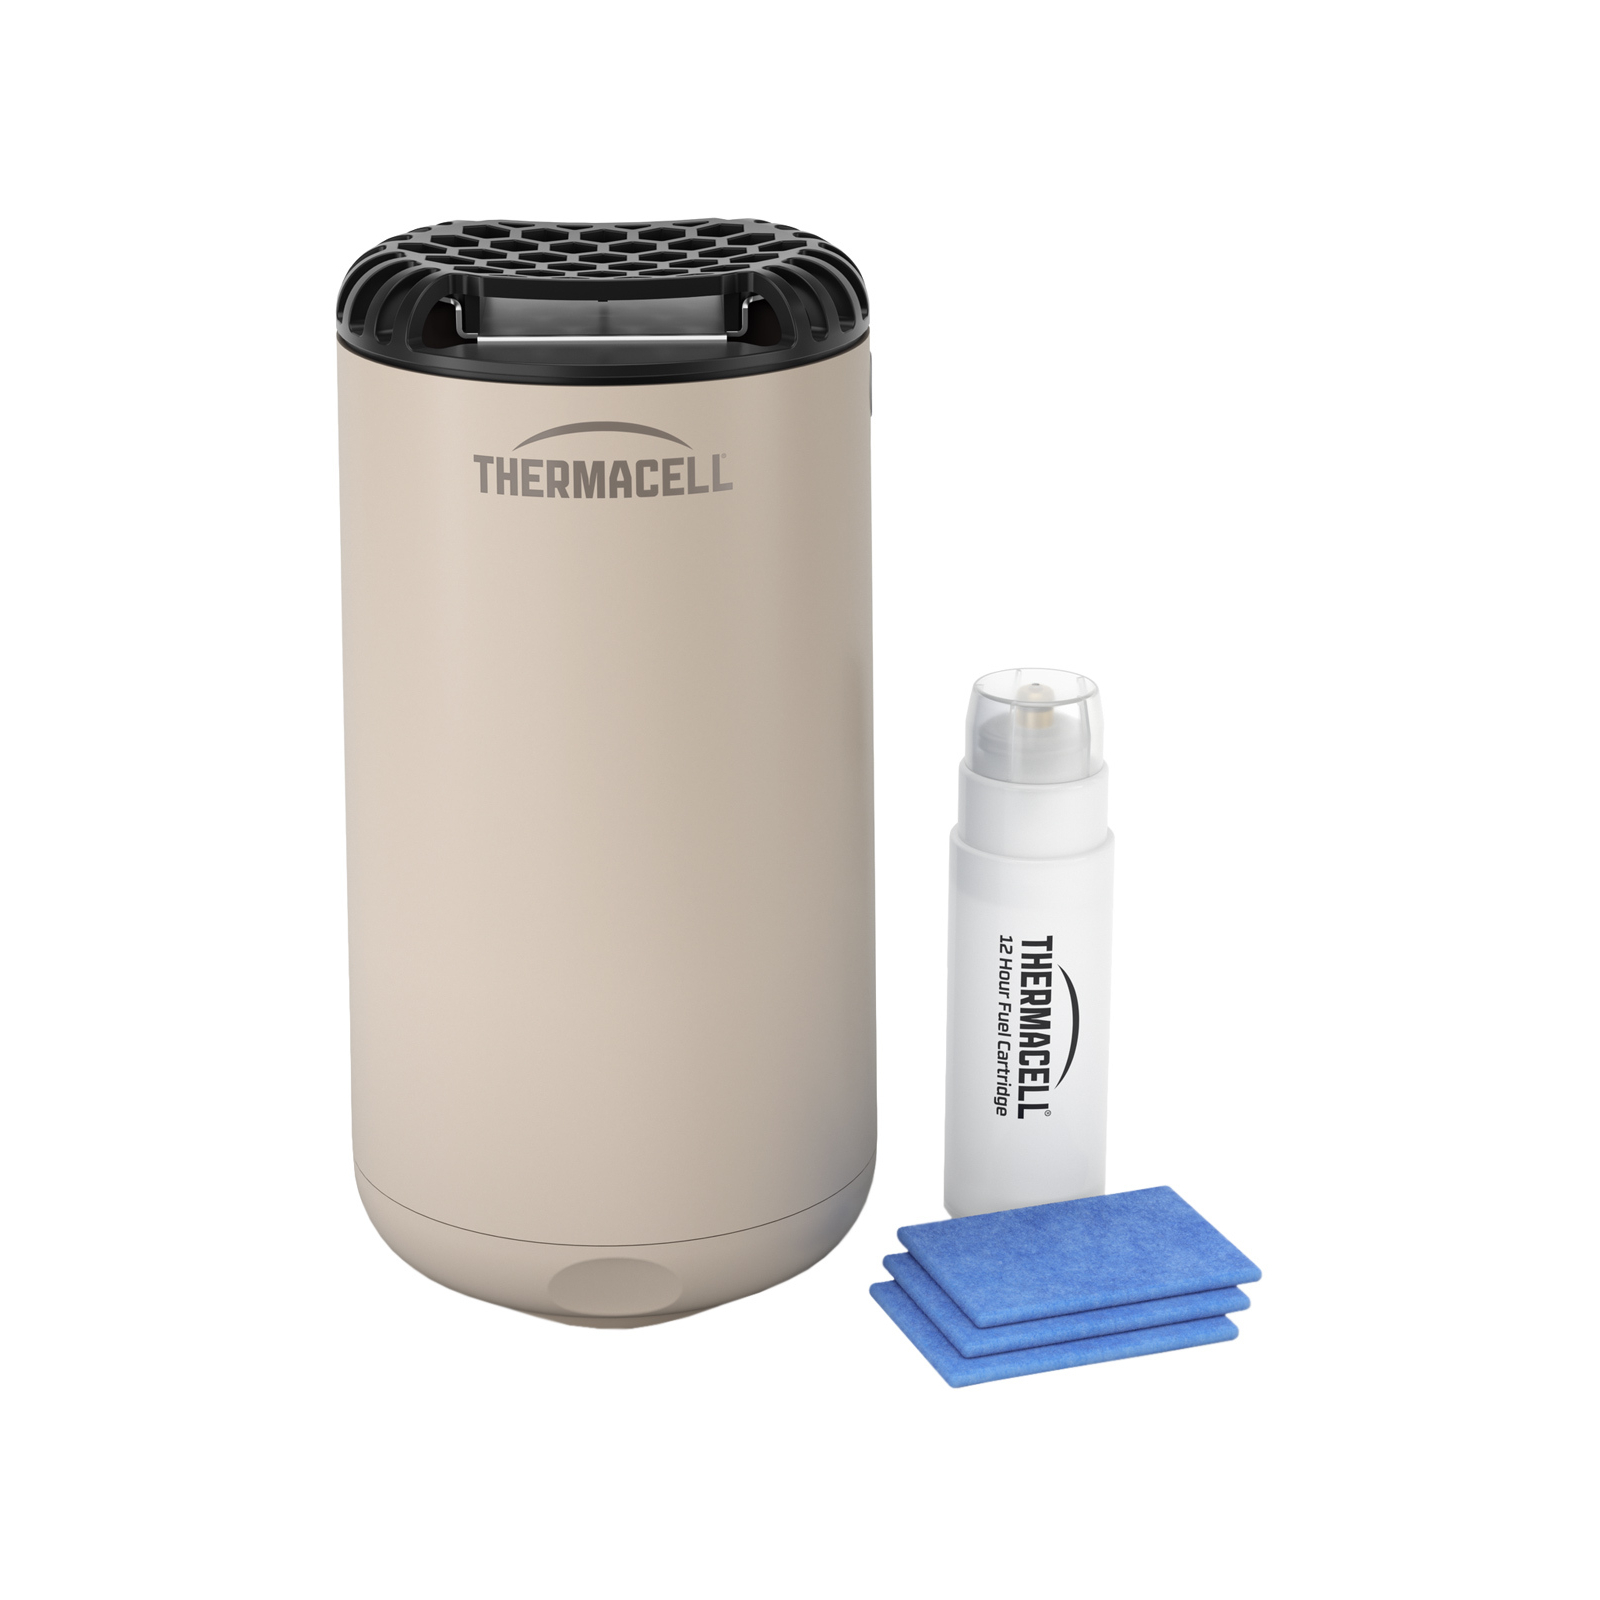 Фумигатор Тhermacell Patio Shield Mosquito Repeller MR-PS Linen (1200.05.92) изображение 3